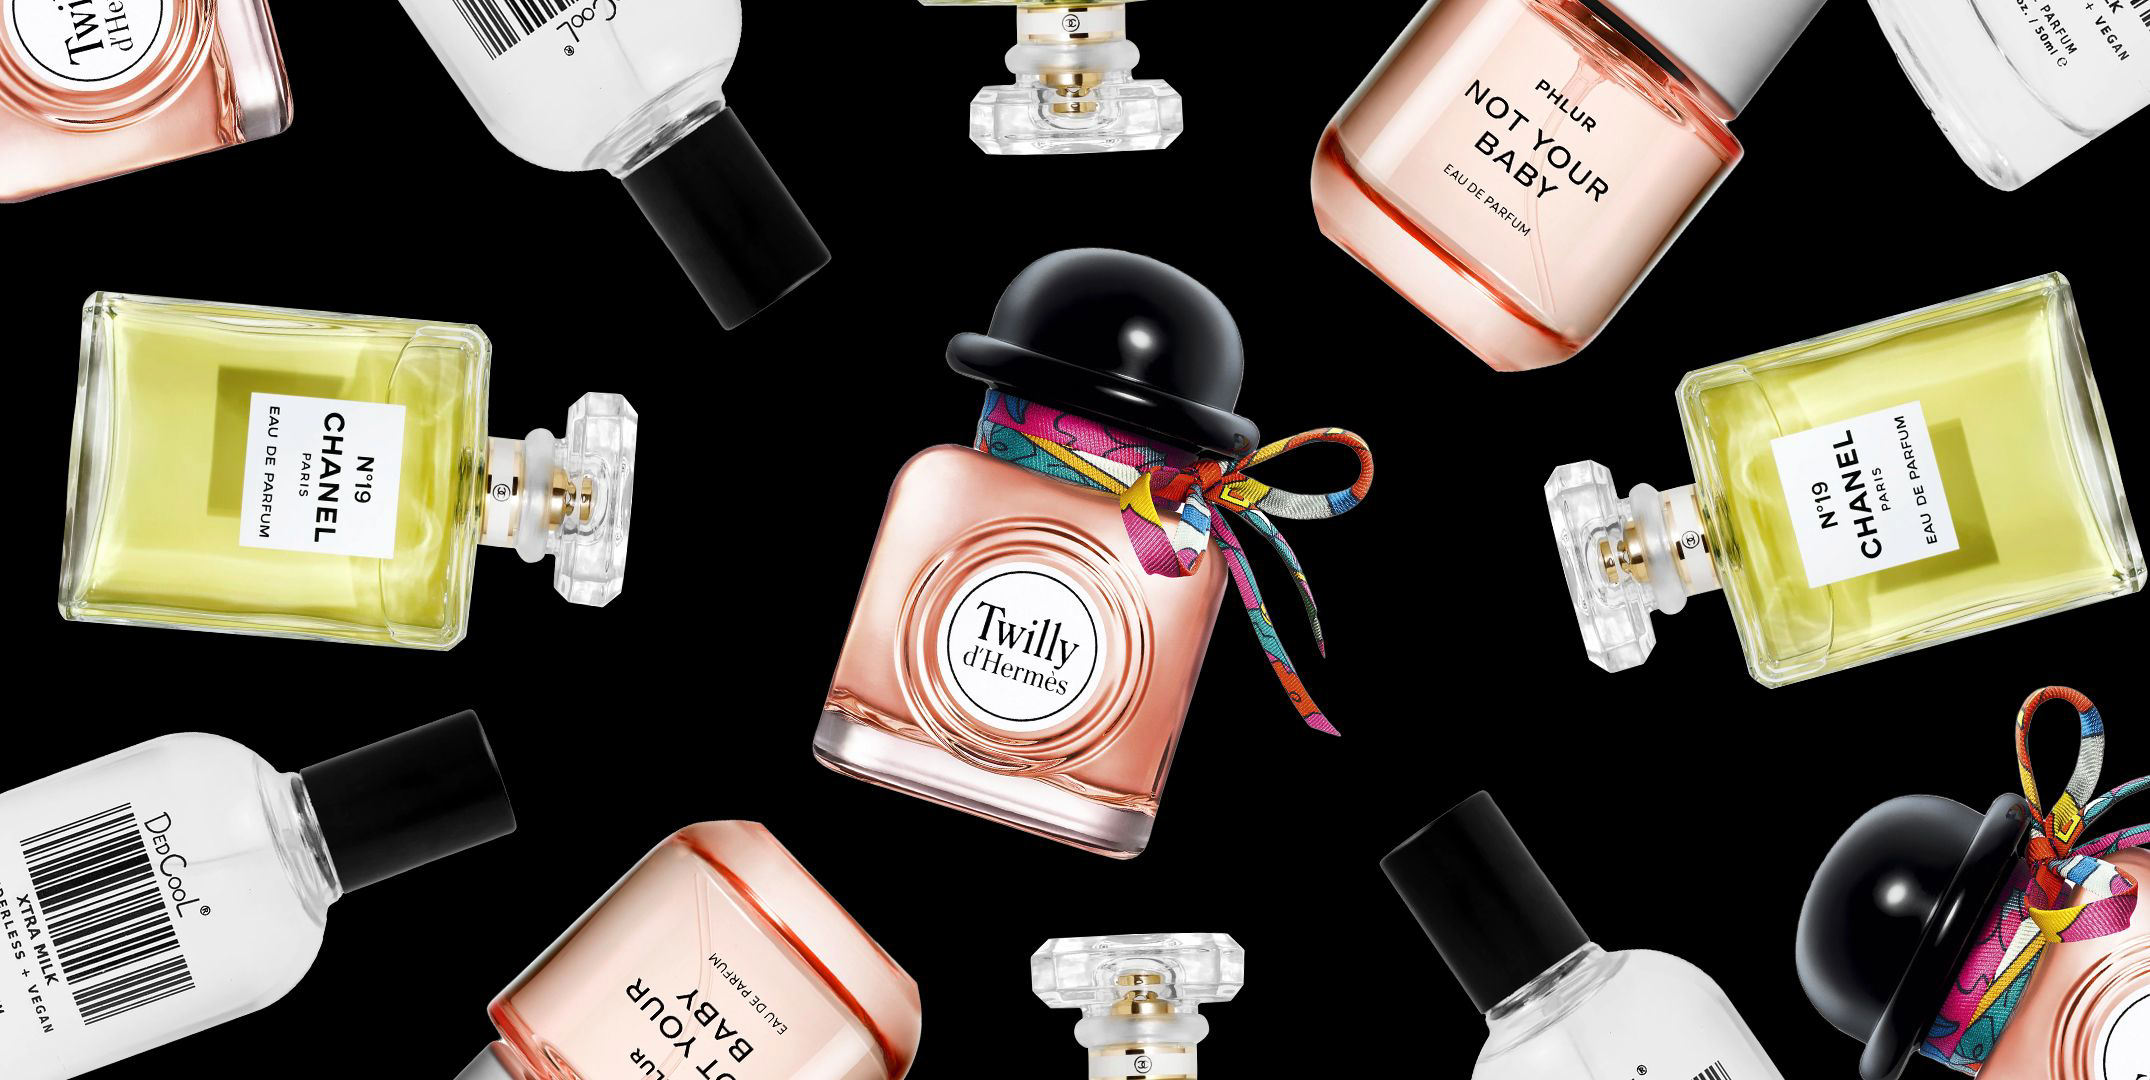 Found: The Best Powdery Perfumes for Every Single Scent Vibe